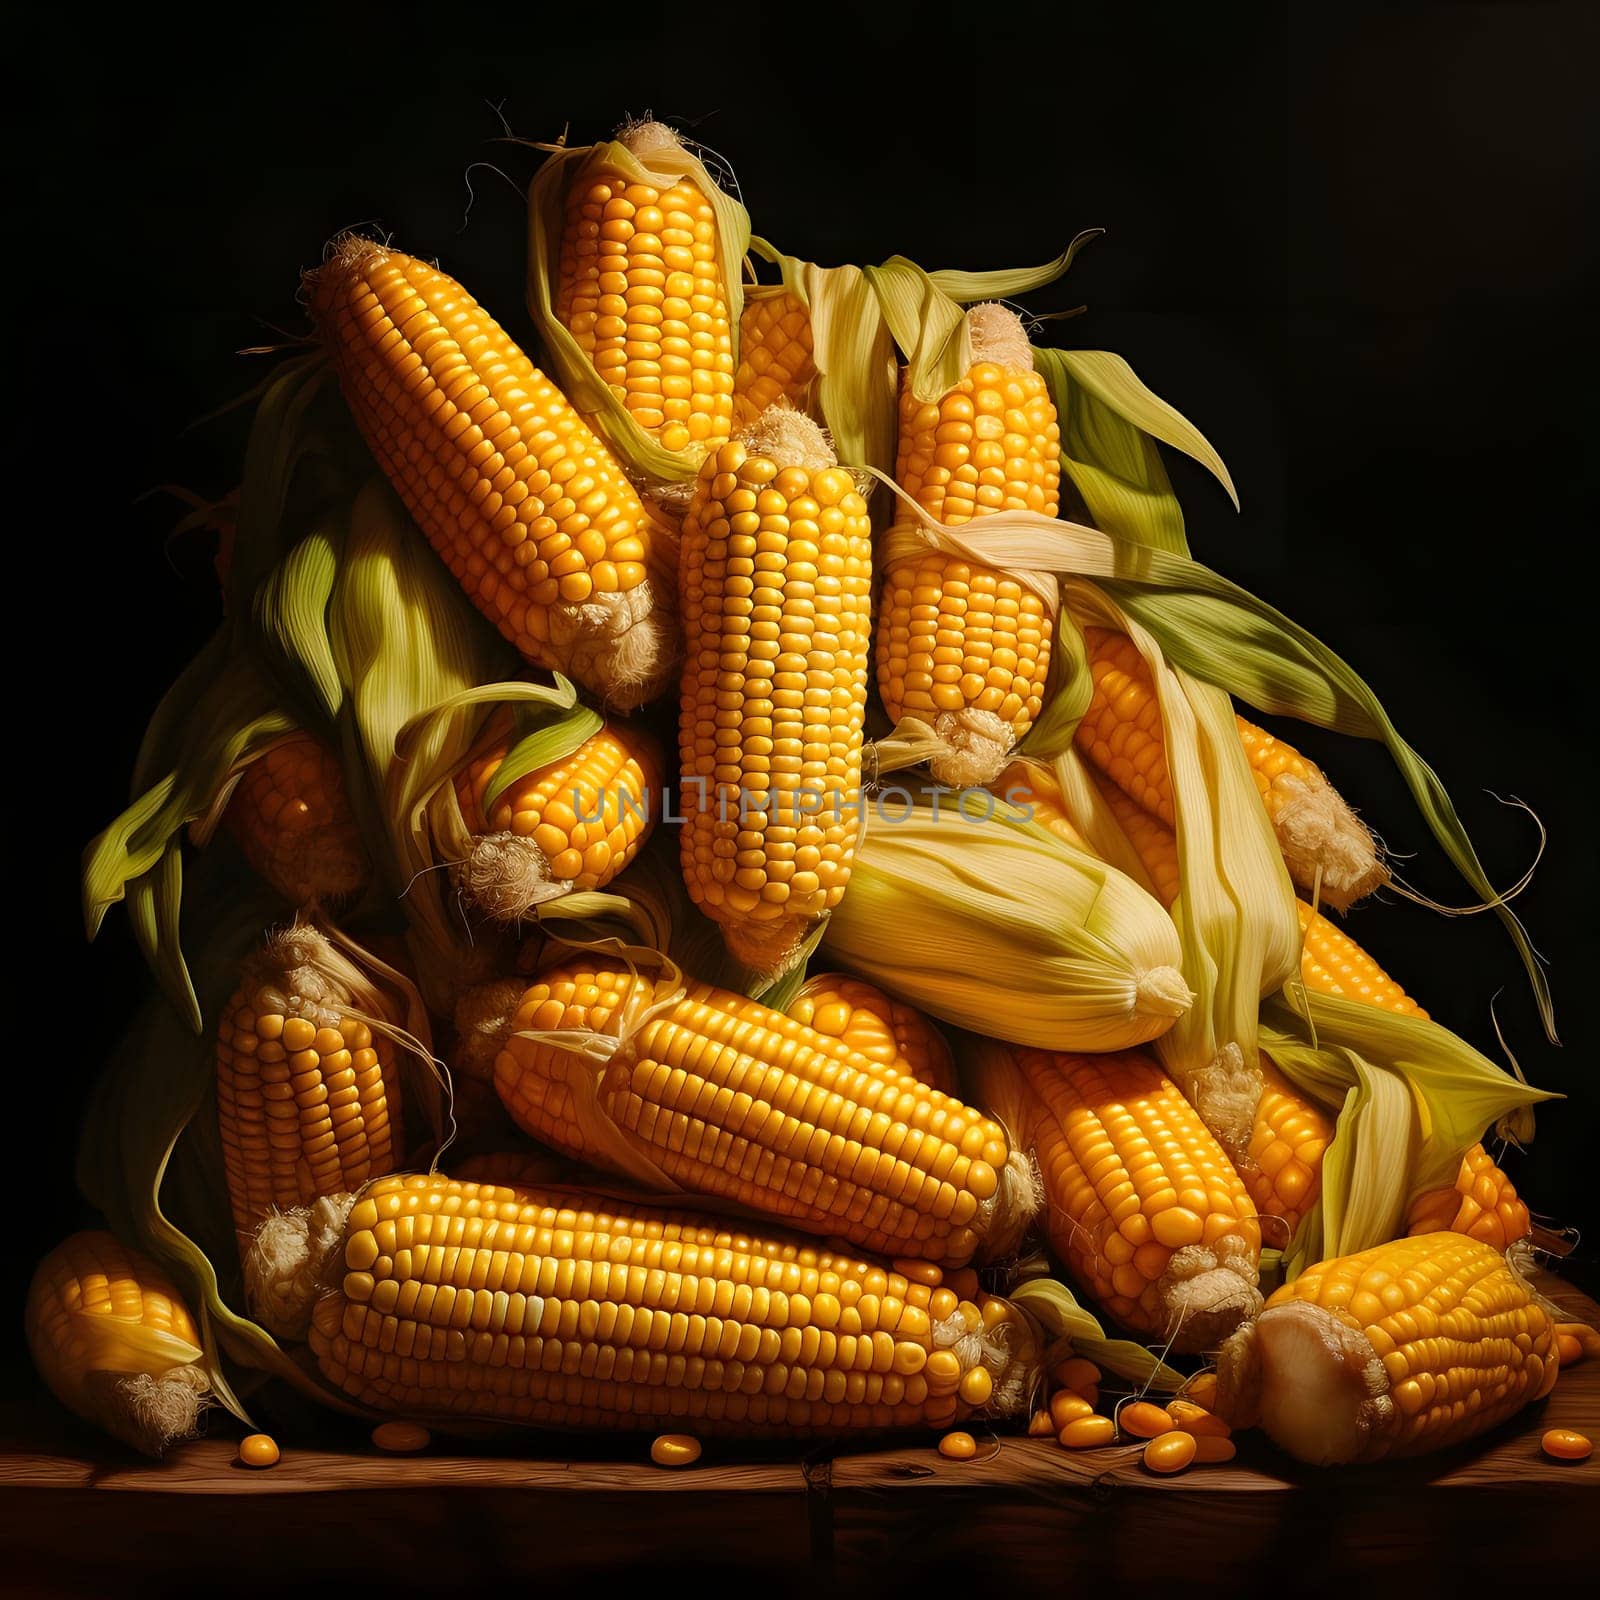 Stack of yellow corn cobs with leaves on wooden table, black background. Corn as a dish of thanksgiving for the harvest. An atmosphere of joy and celebration.